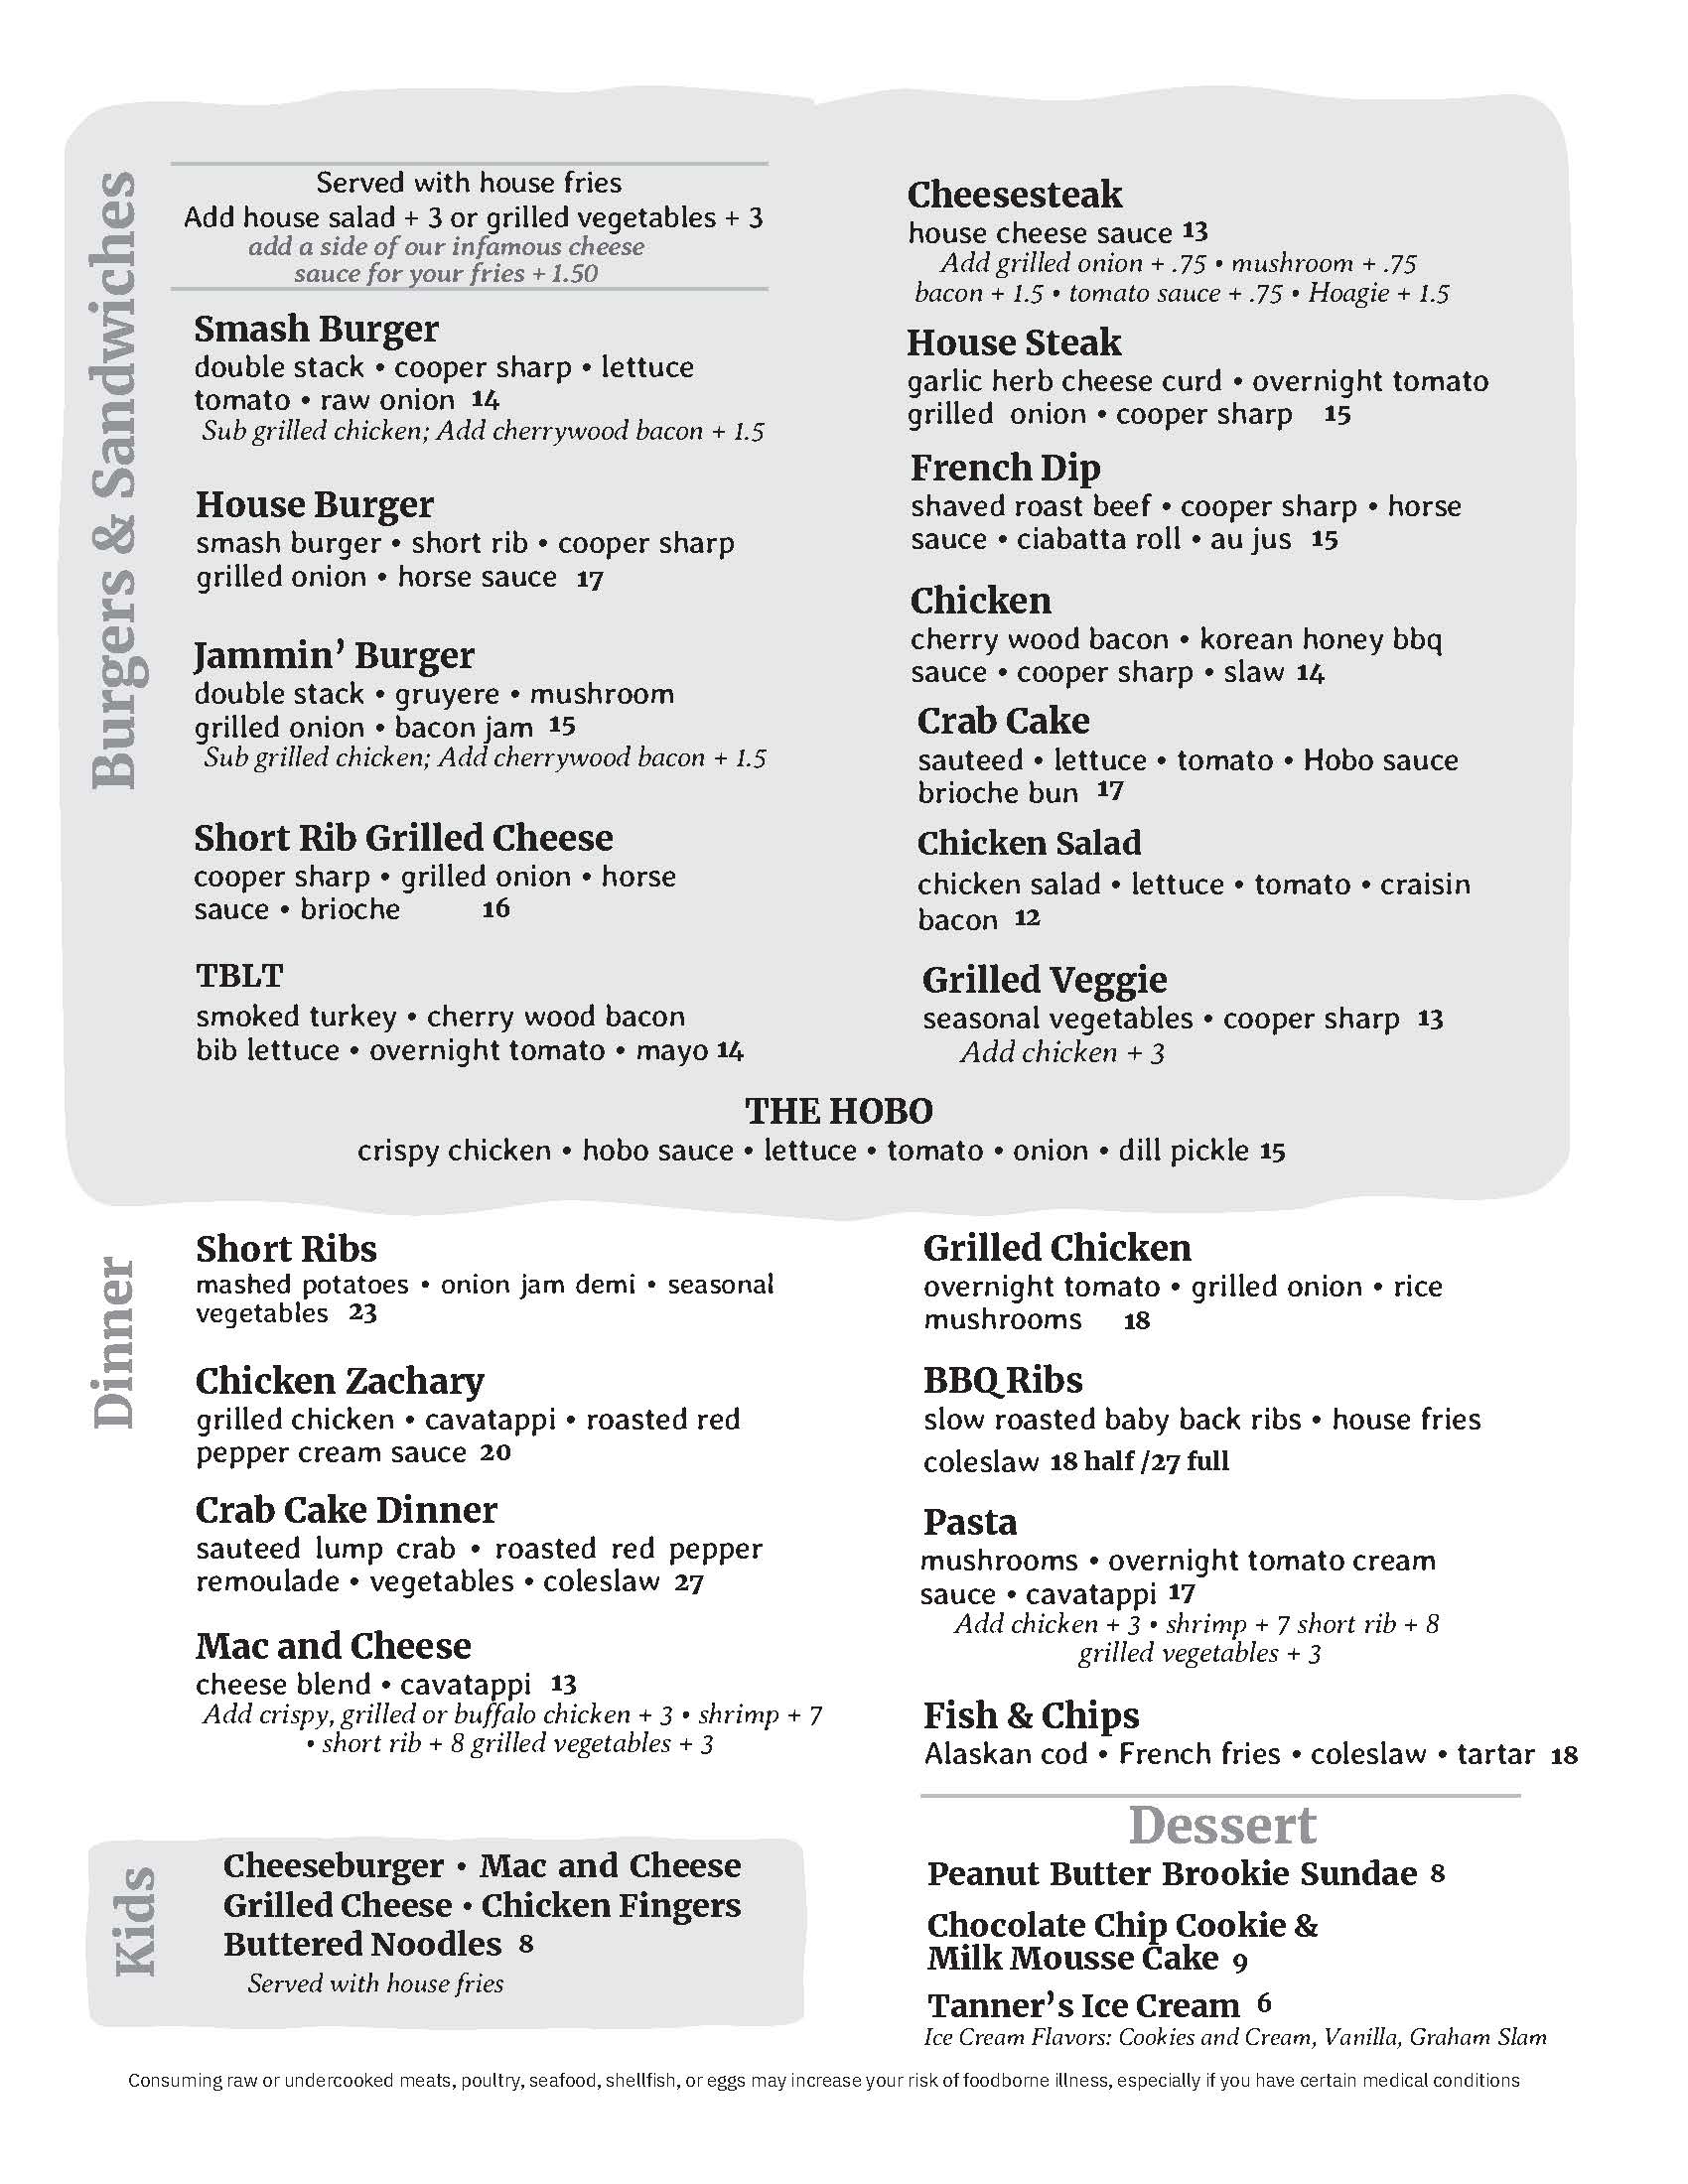 The menu for a restaurant is shown in black and white.